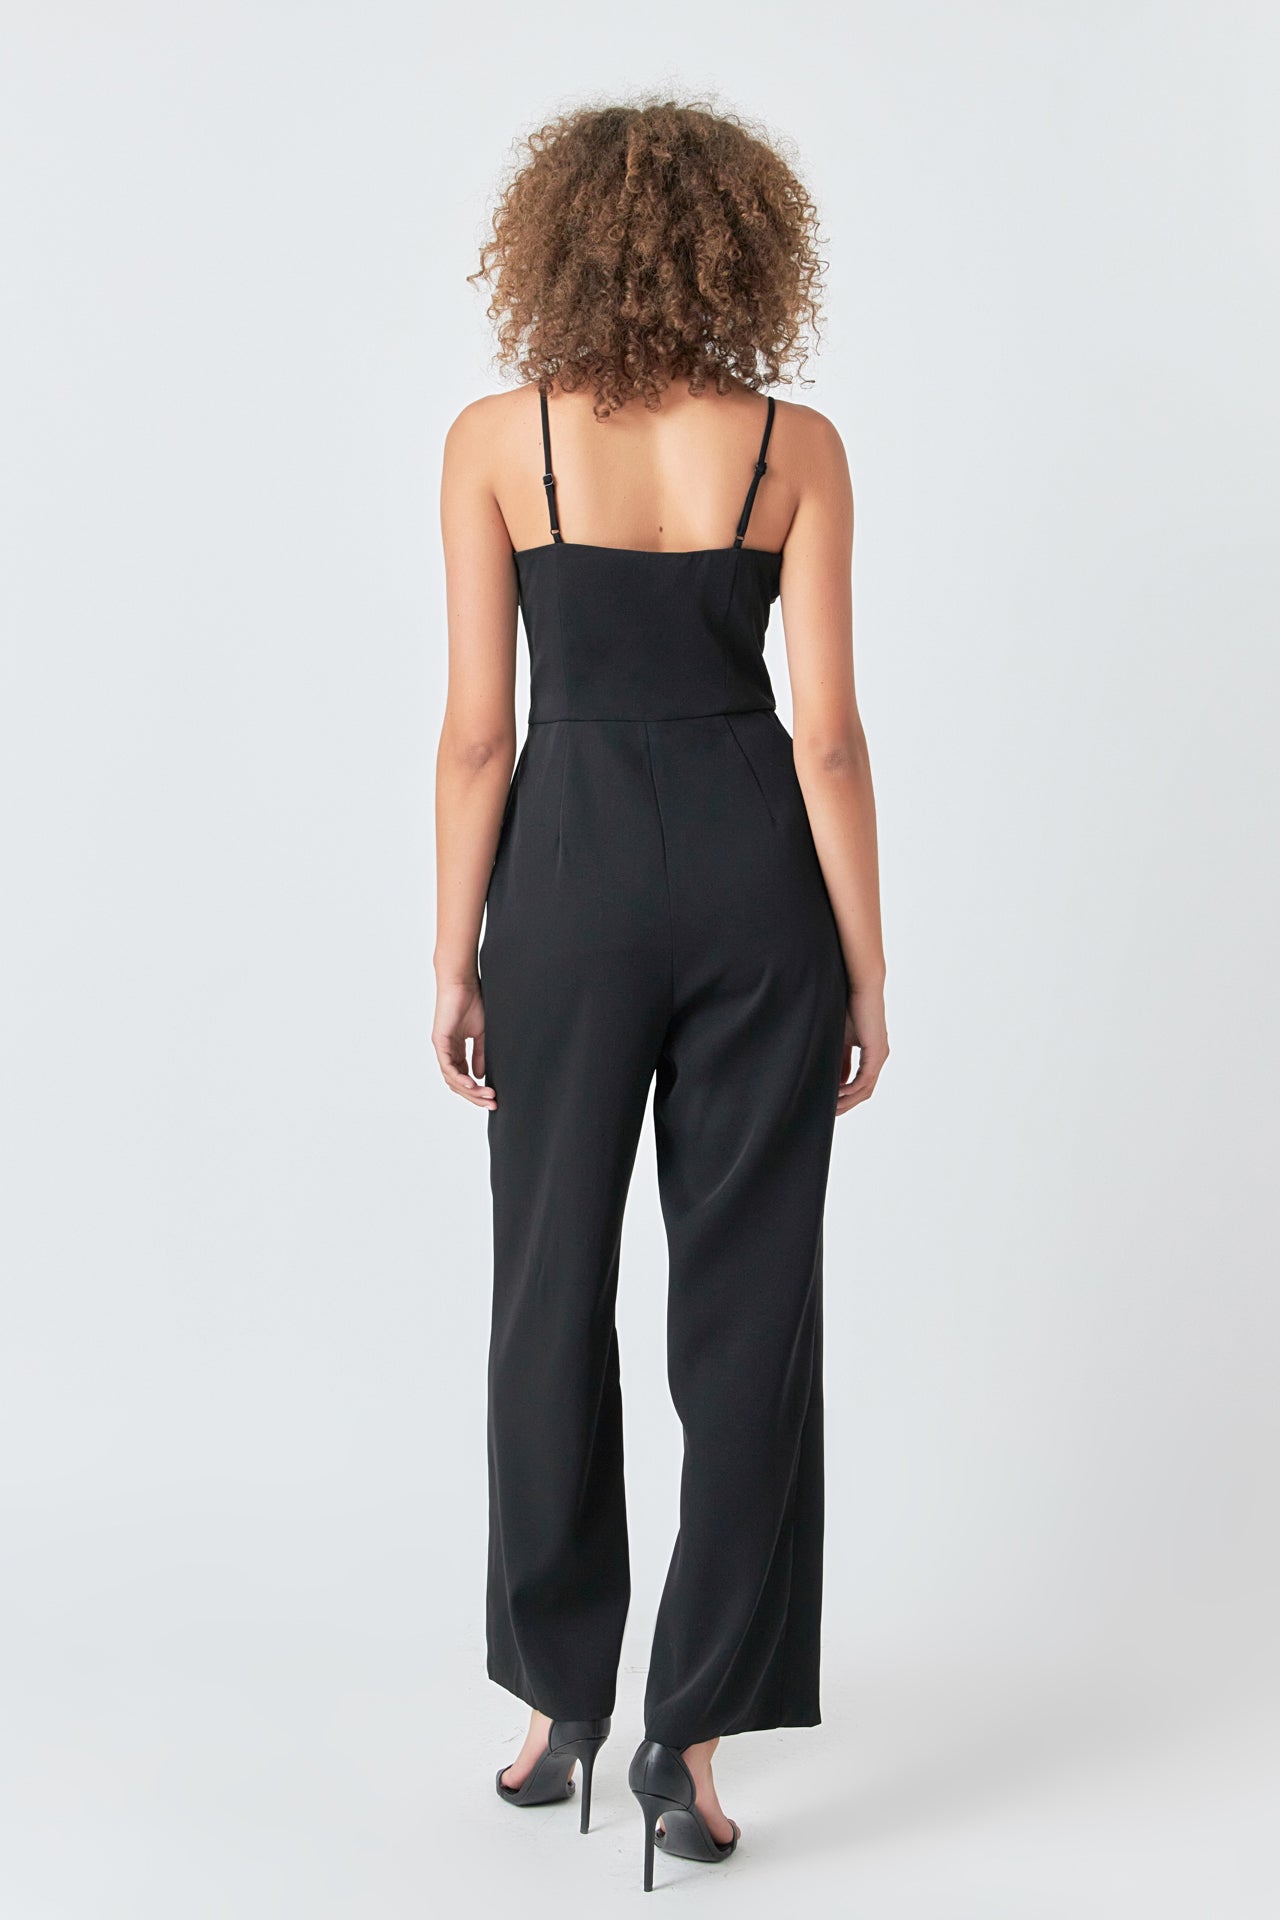 ENDLESS ROSE - Flower Trim Jumpsuit - JUMPSUITS available at Objectrare